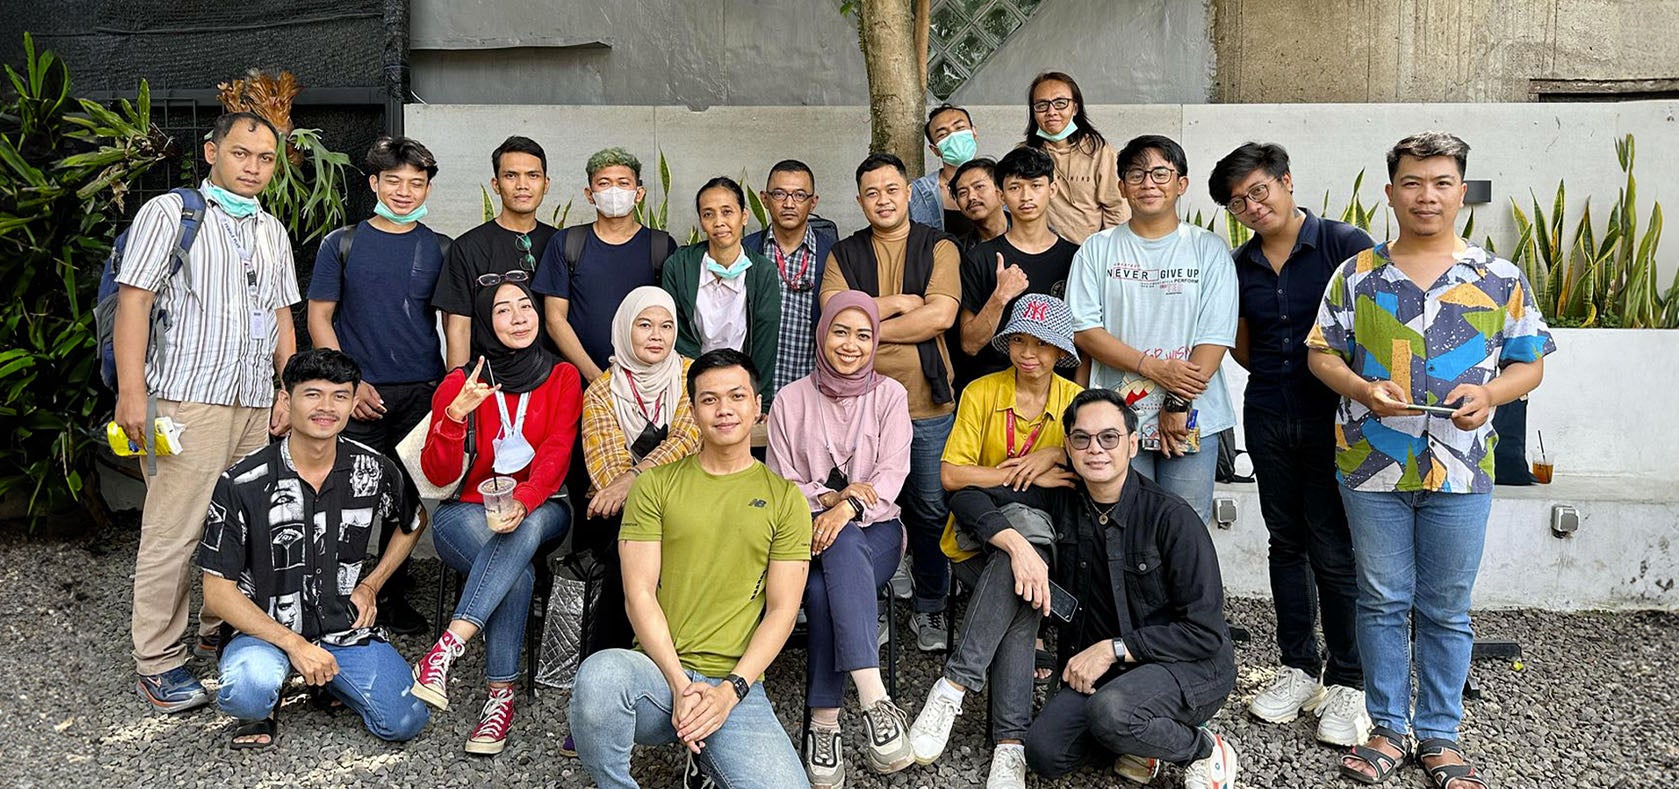 Arisdo (center in first row) is with HIV Peer Support from Female Plus and Pesona Bumi Pasundan Foundation, September 2023, Bogor, Indonesia. Photo: Courtesy of Arisdo Gonzalez